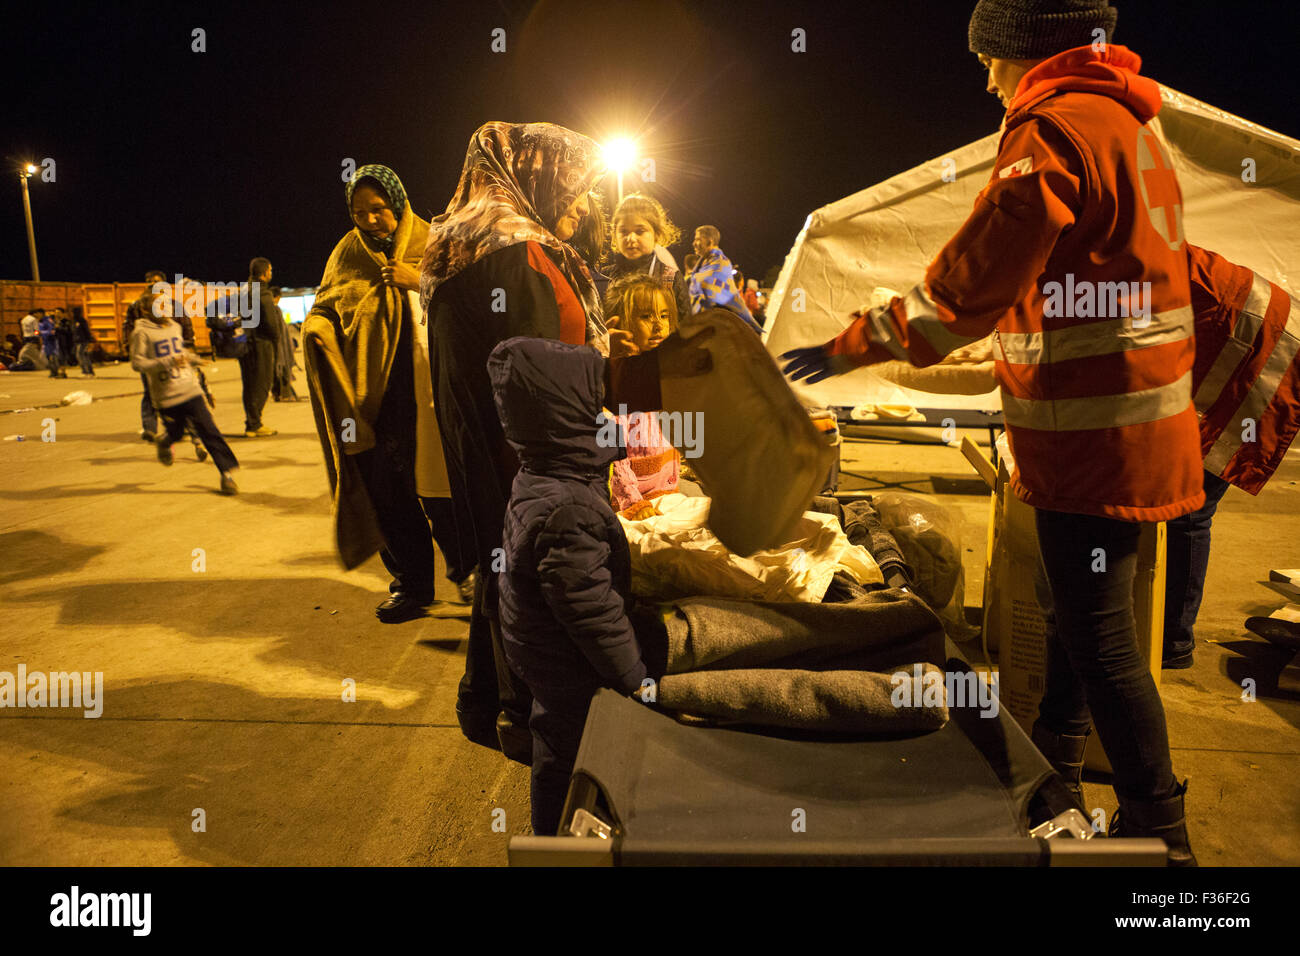 Refugees receives blankets from the Austrian red cross at the border crossing near Nickelsdorf on the Hungarian - Austrian border Stock Photo